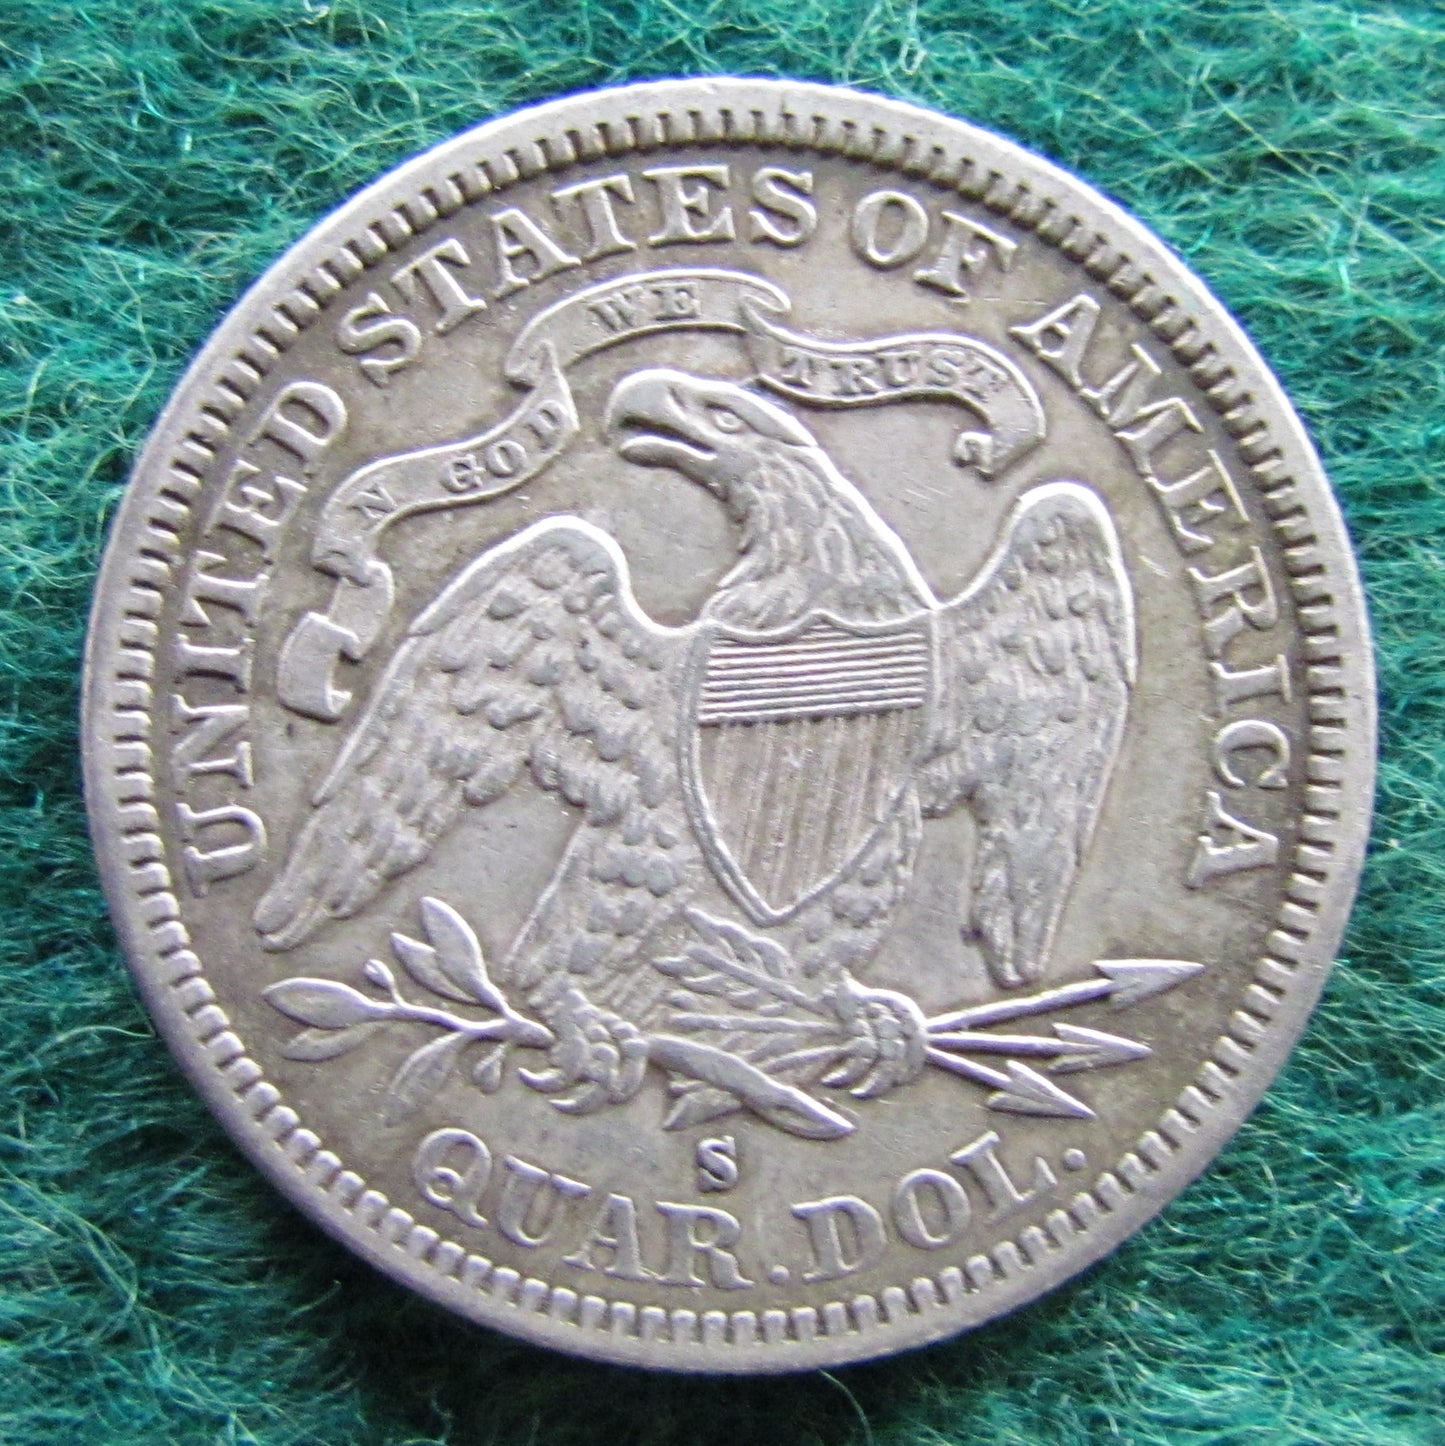 USA American 1877 S Seated Liberty Quarter Coin - Circulated